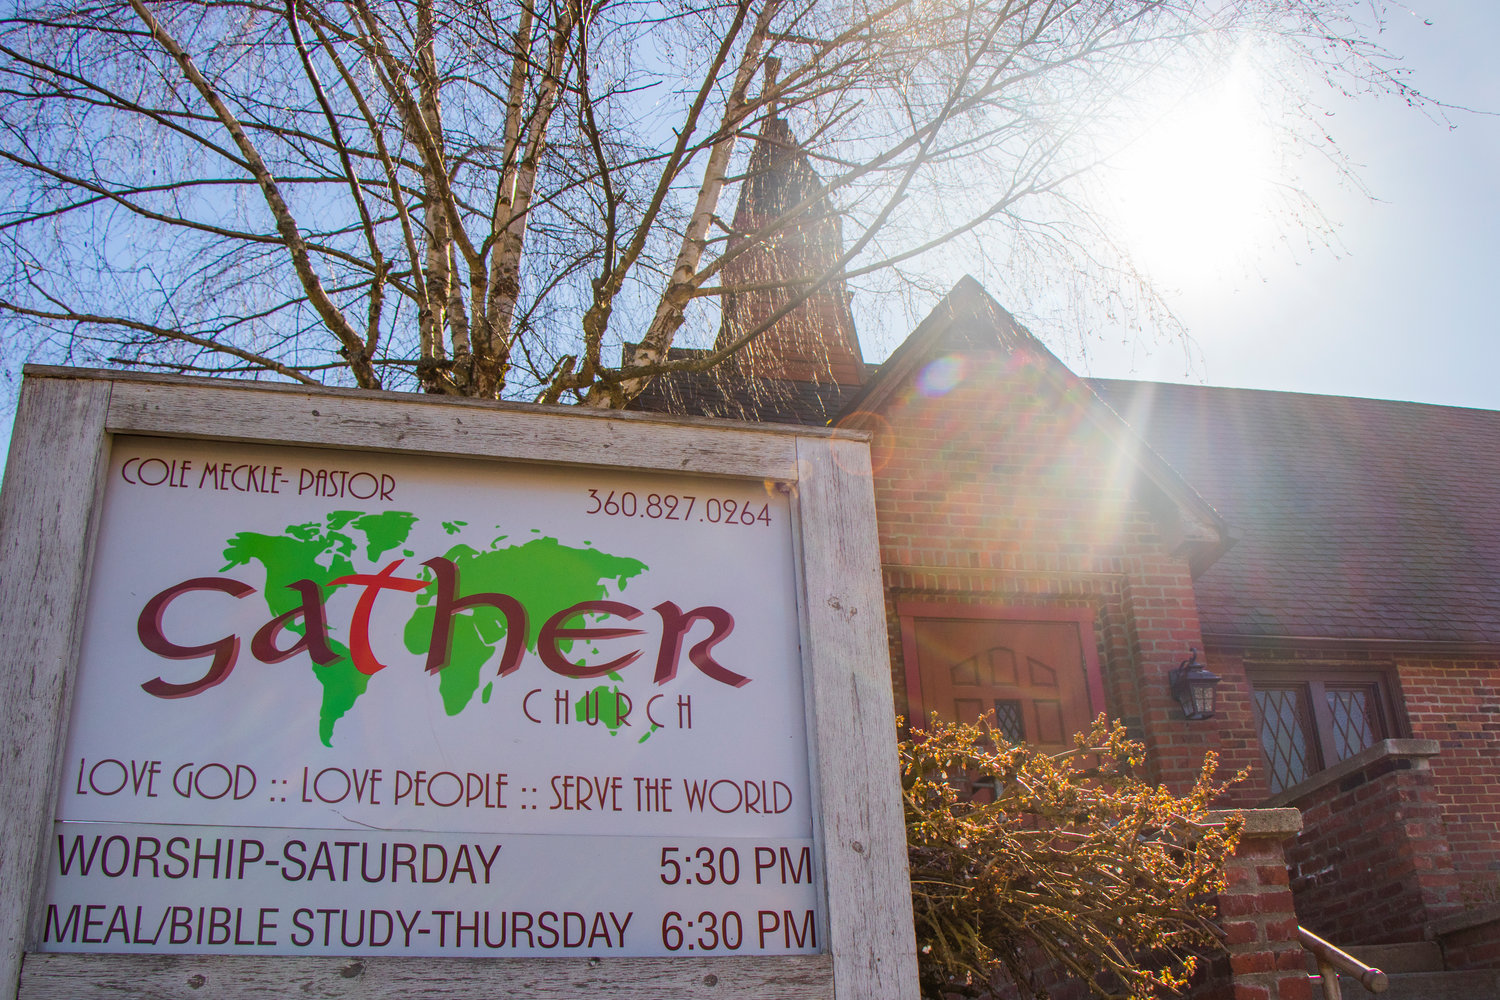 Gather Church is located at 100 S. Rock St. in Centralia.